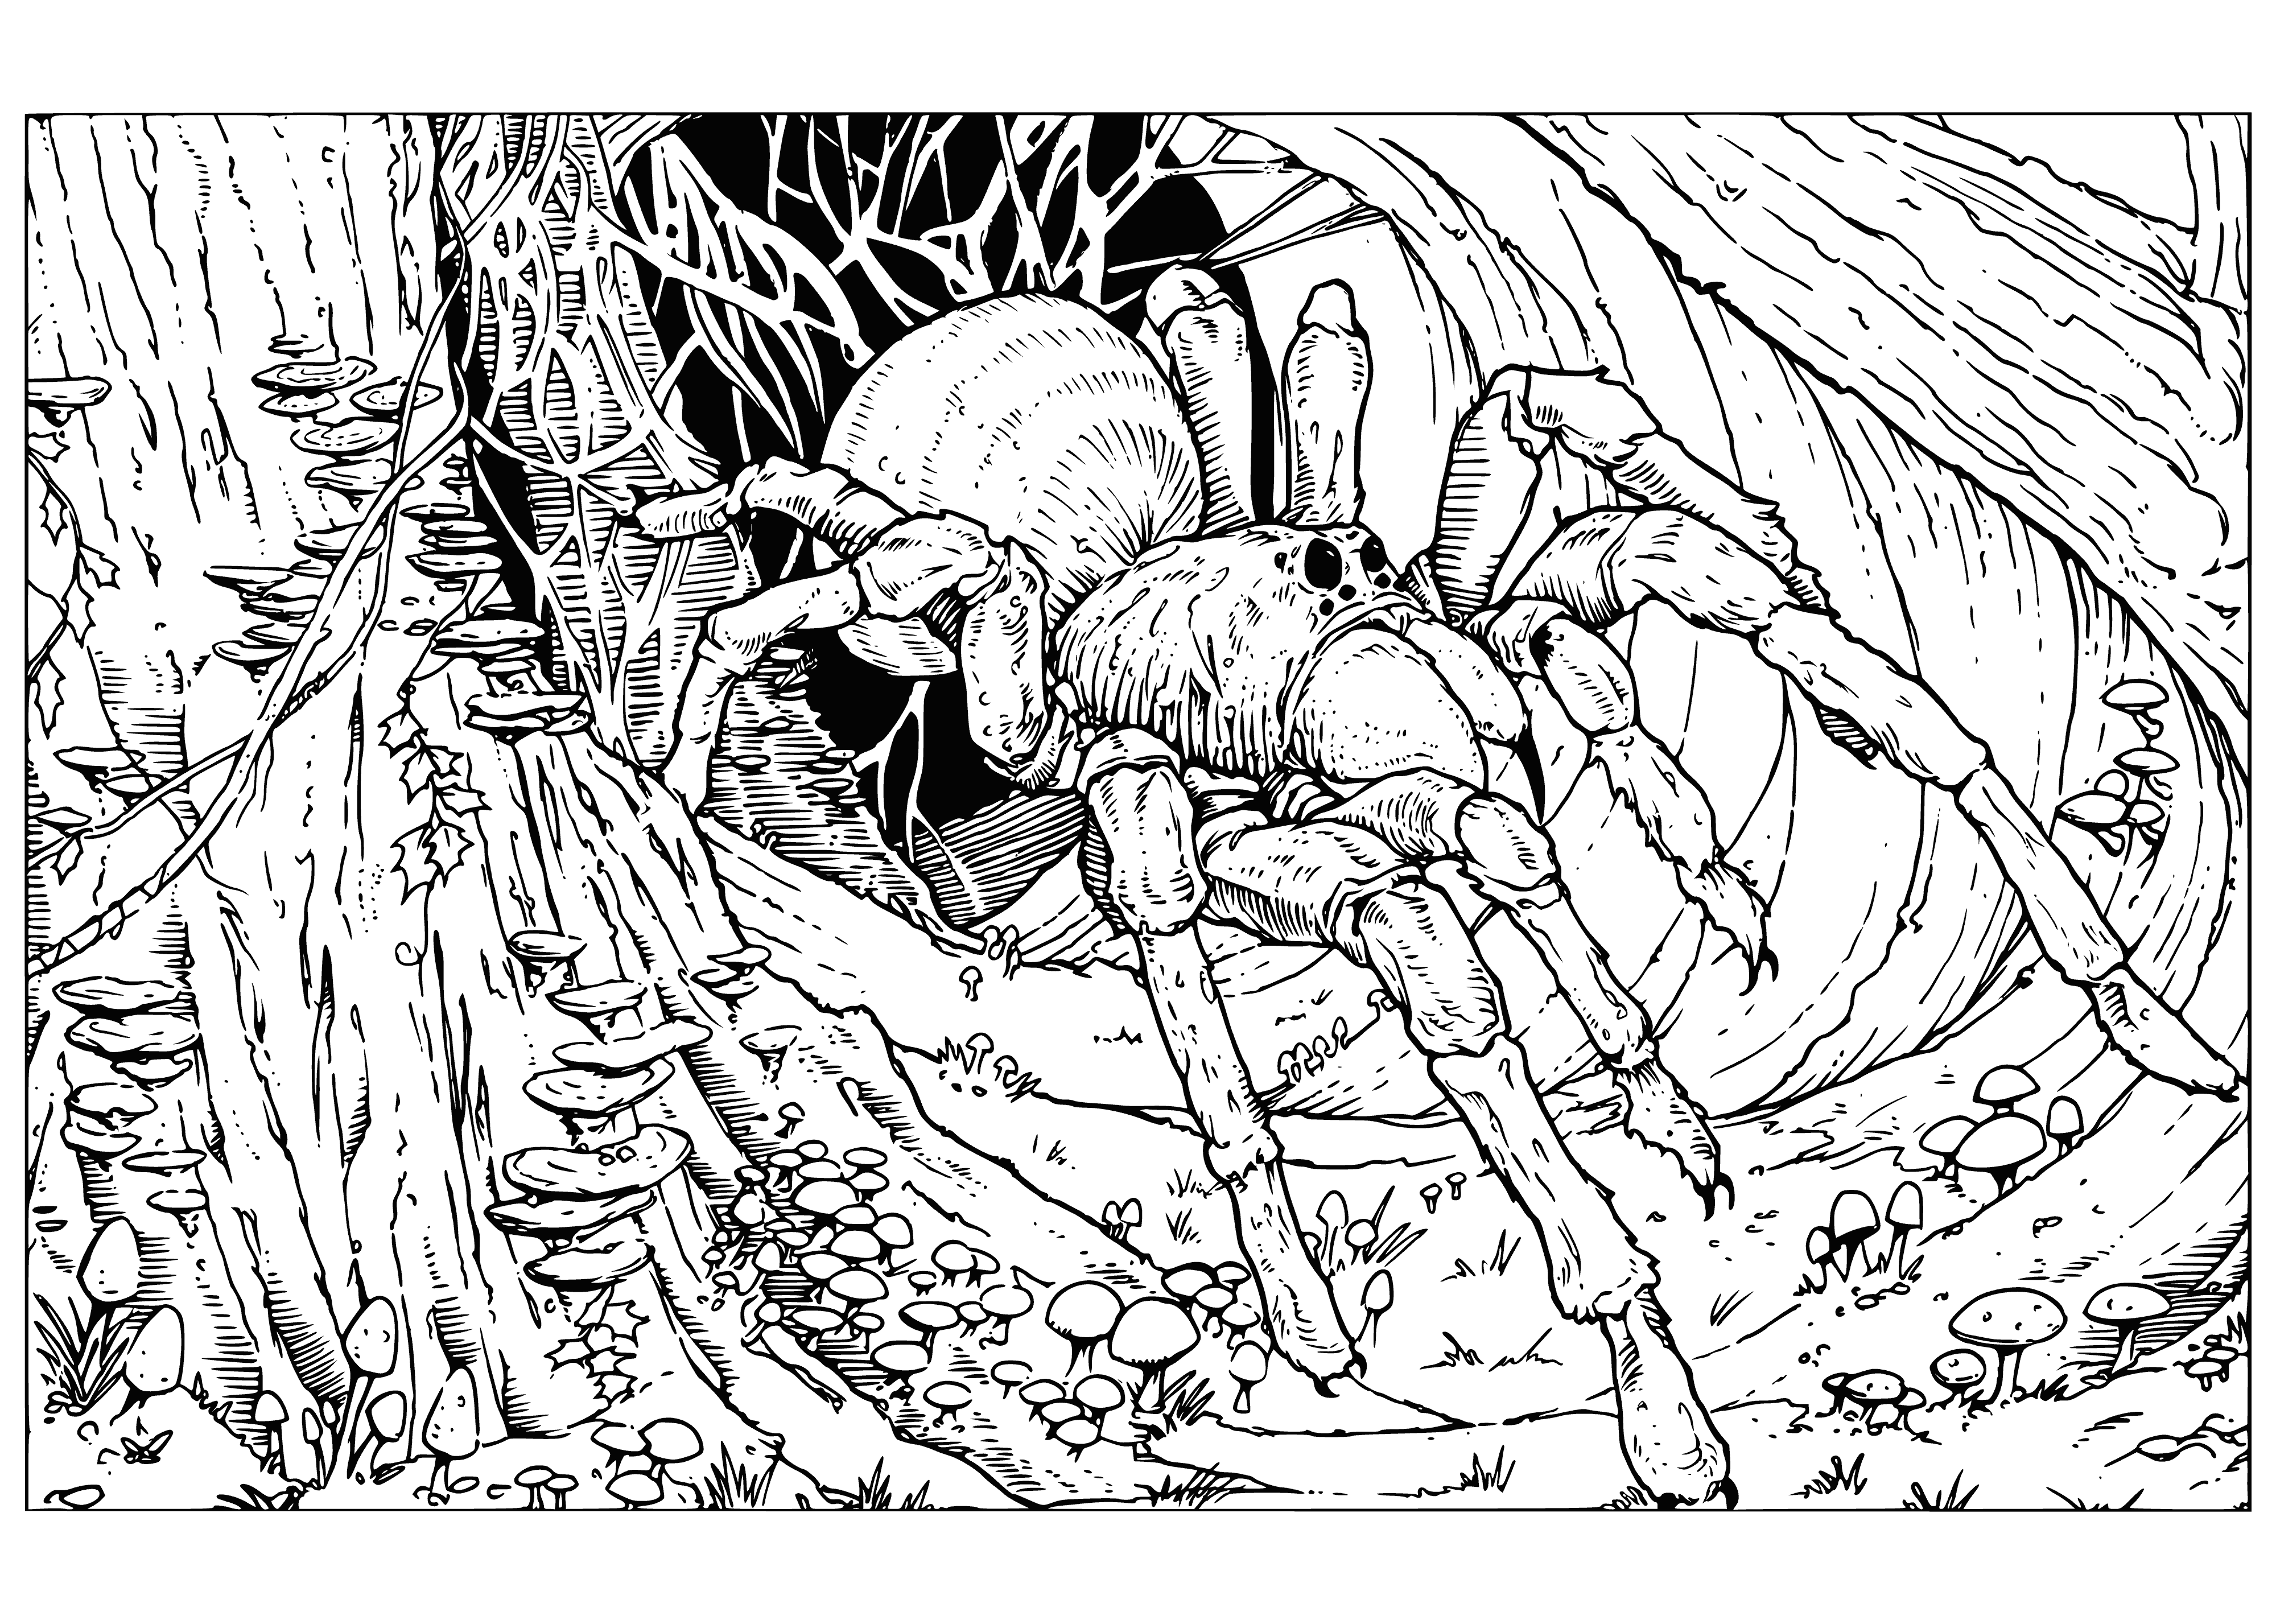 coloring page: A large, hairy, many-eyed spider crouches in a web with little spiders around in Aragog's lair in Harry Potter. #magicalcreature